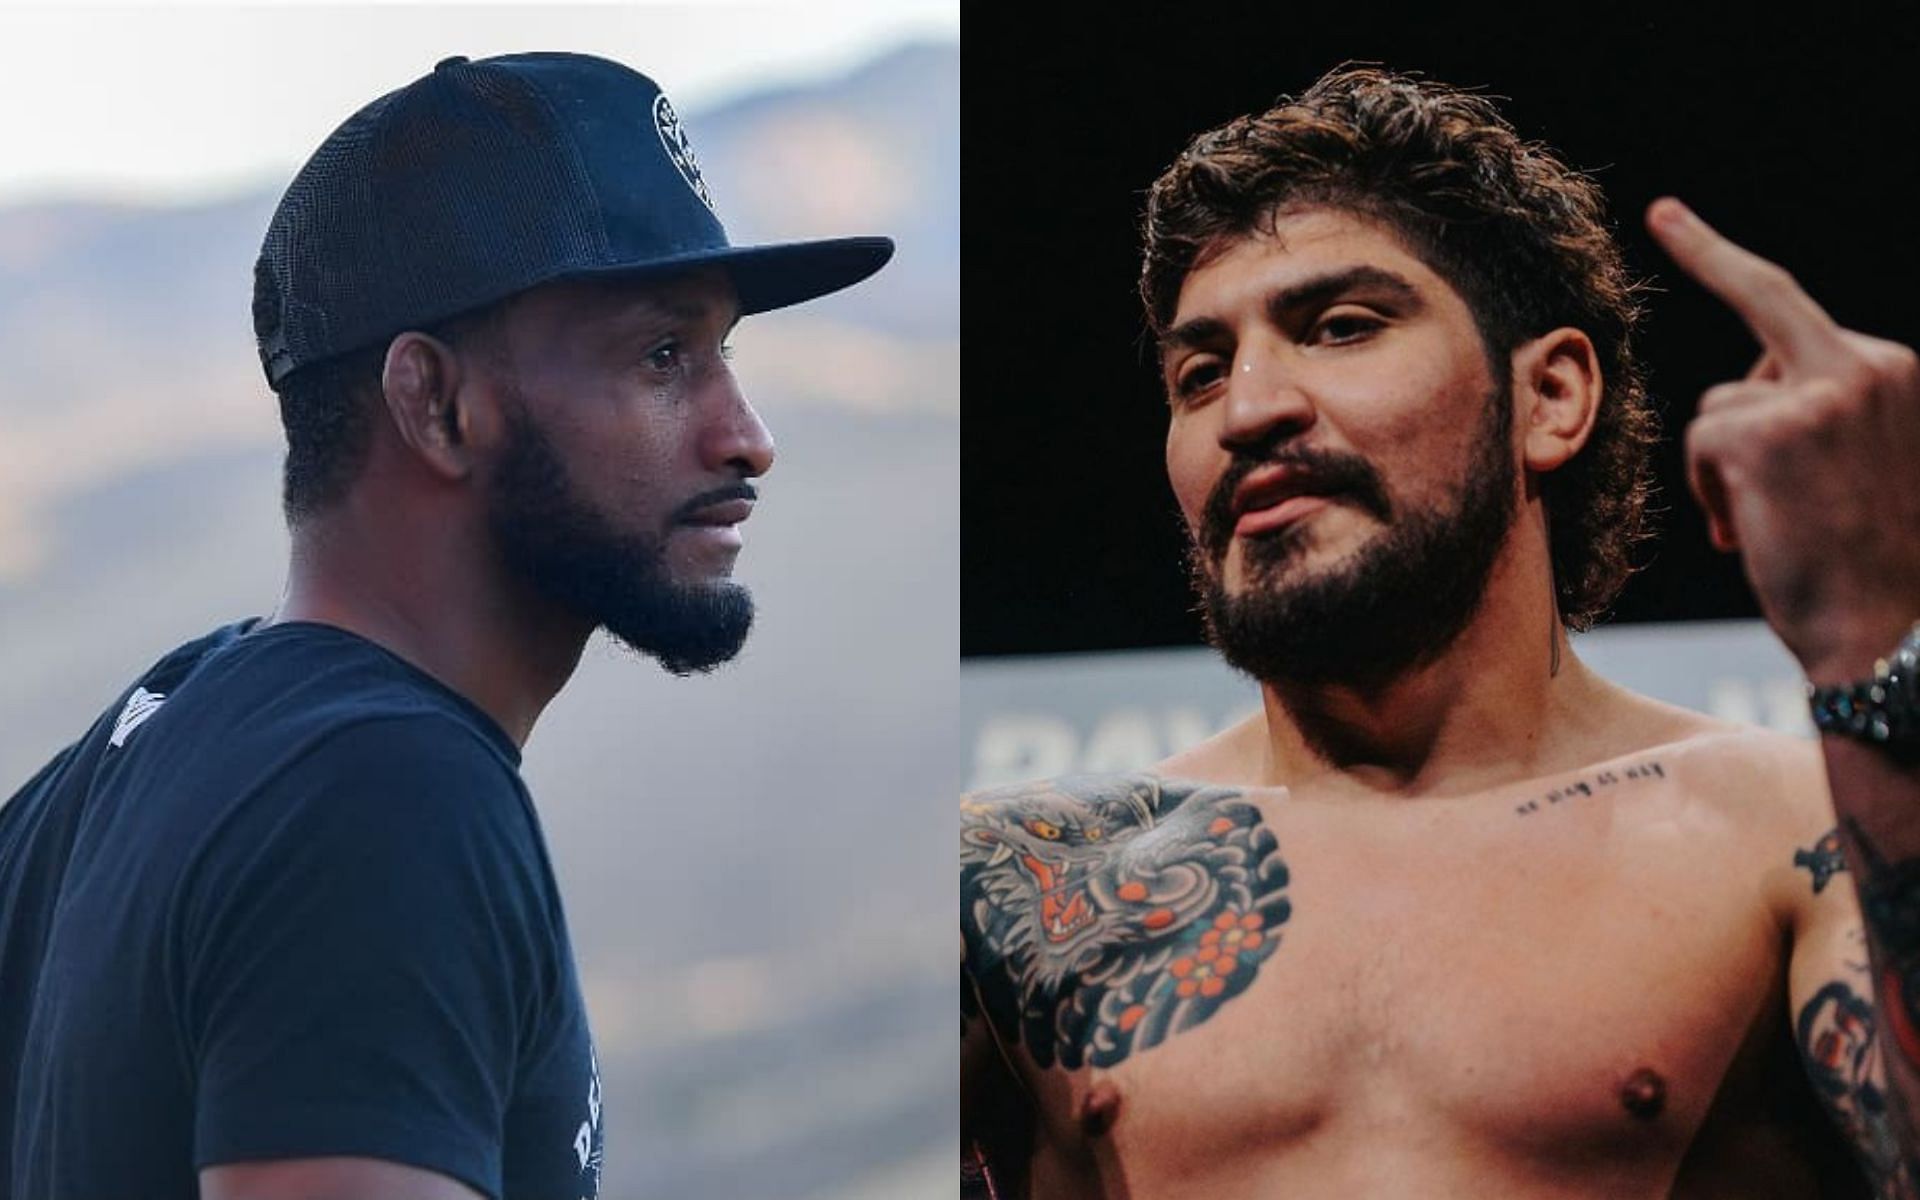 Neil Magny gets caught in the cross fire as Dillon Danis blasts UFC fighter [Image courtesy @neil_magny170 and @dillondanis on Instagram]